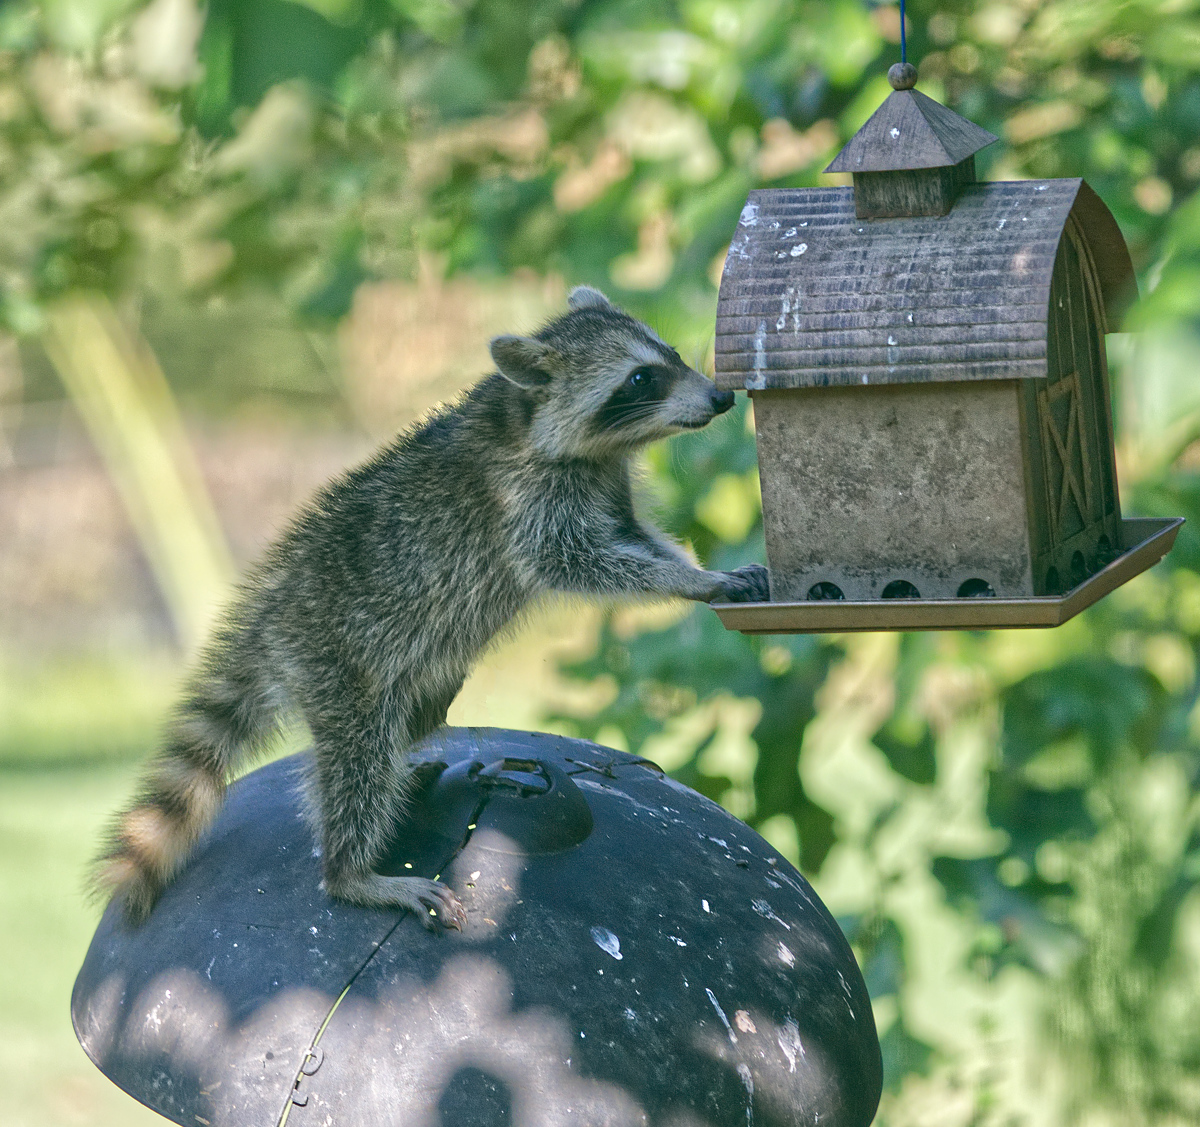 Racoon at Feeder (edited)